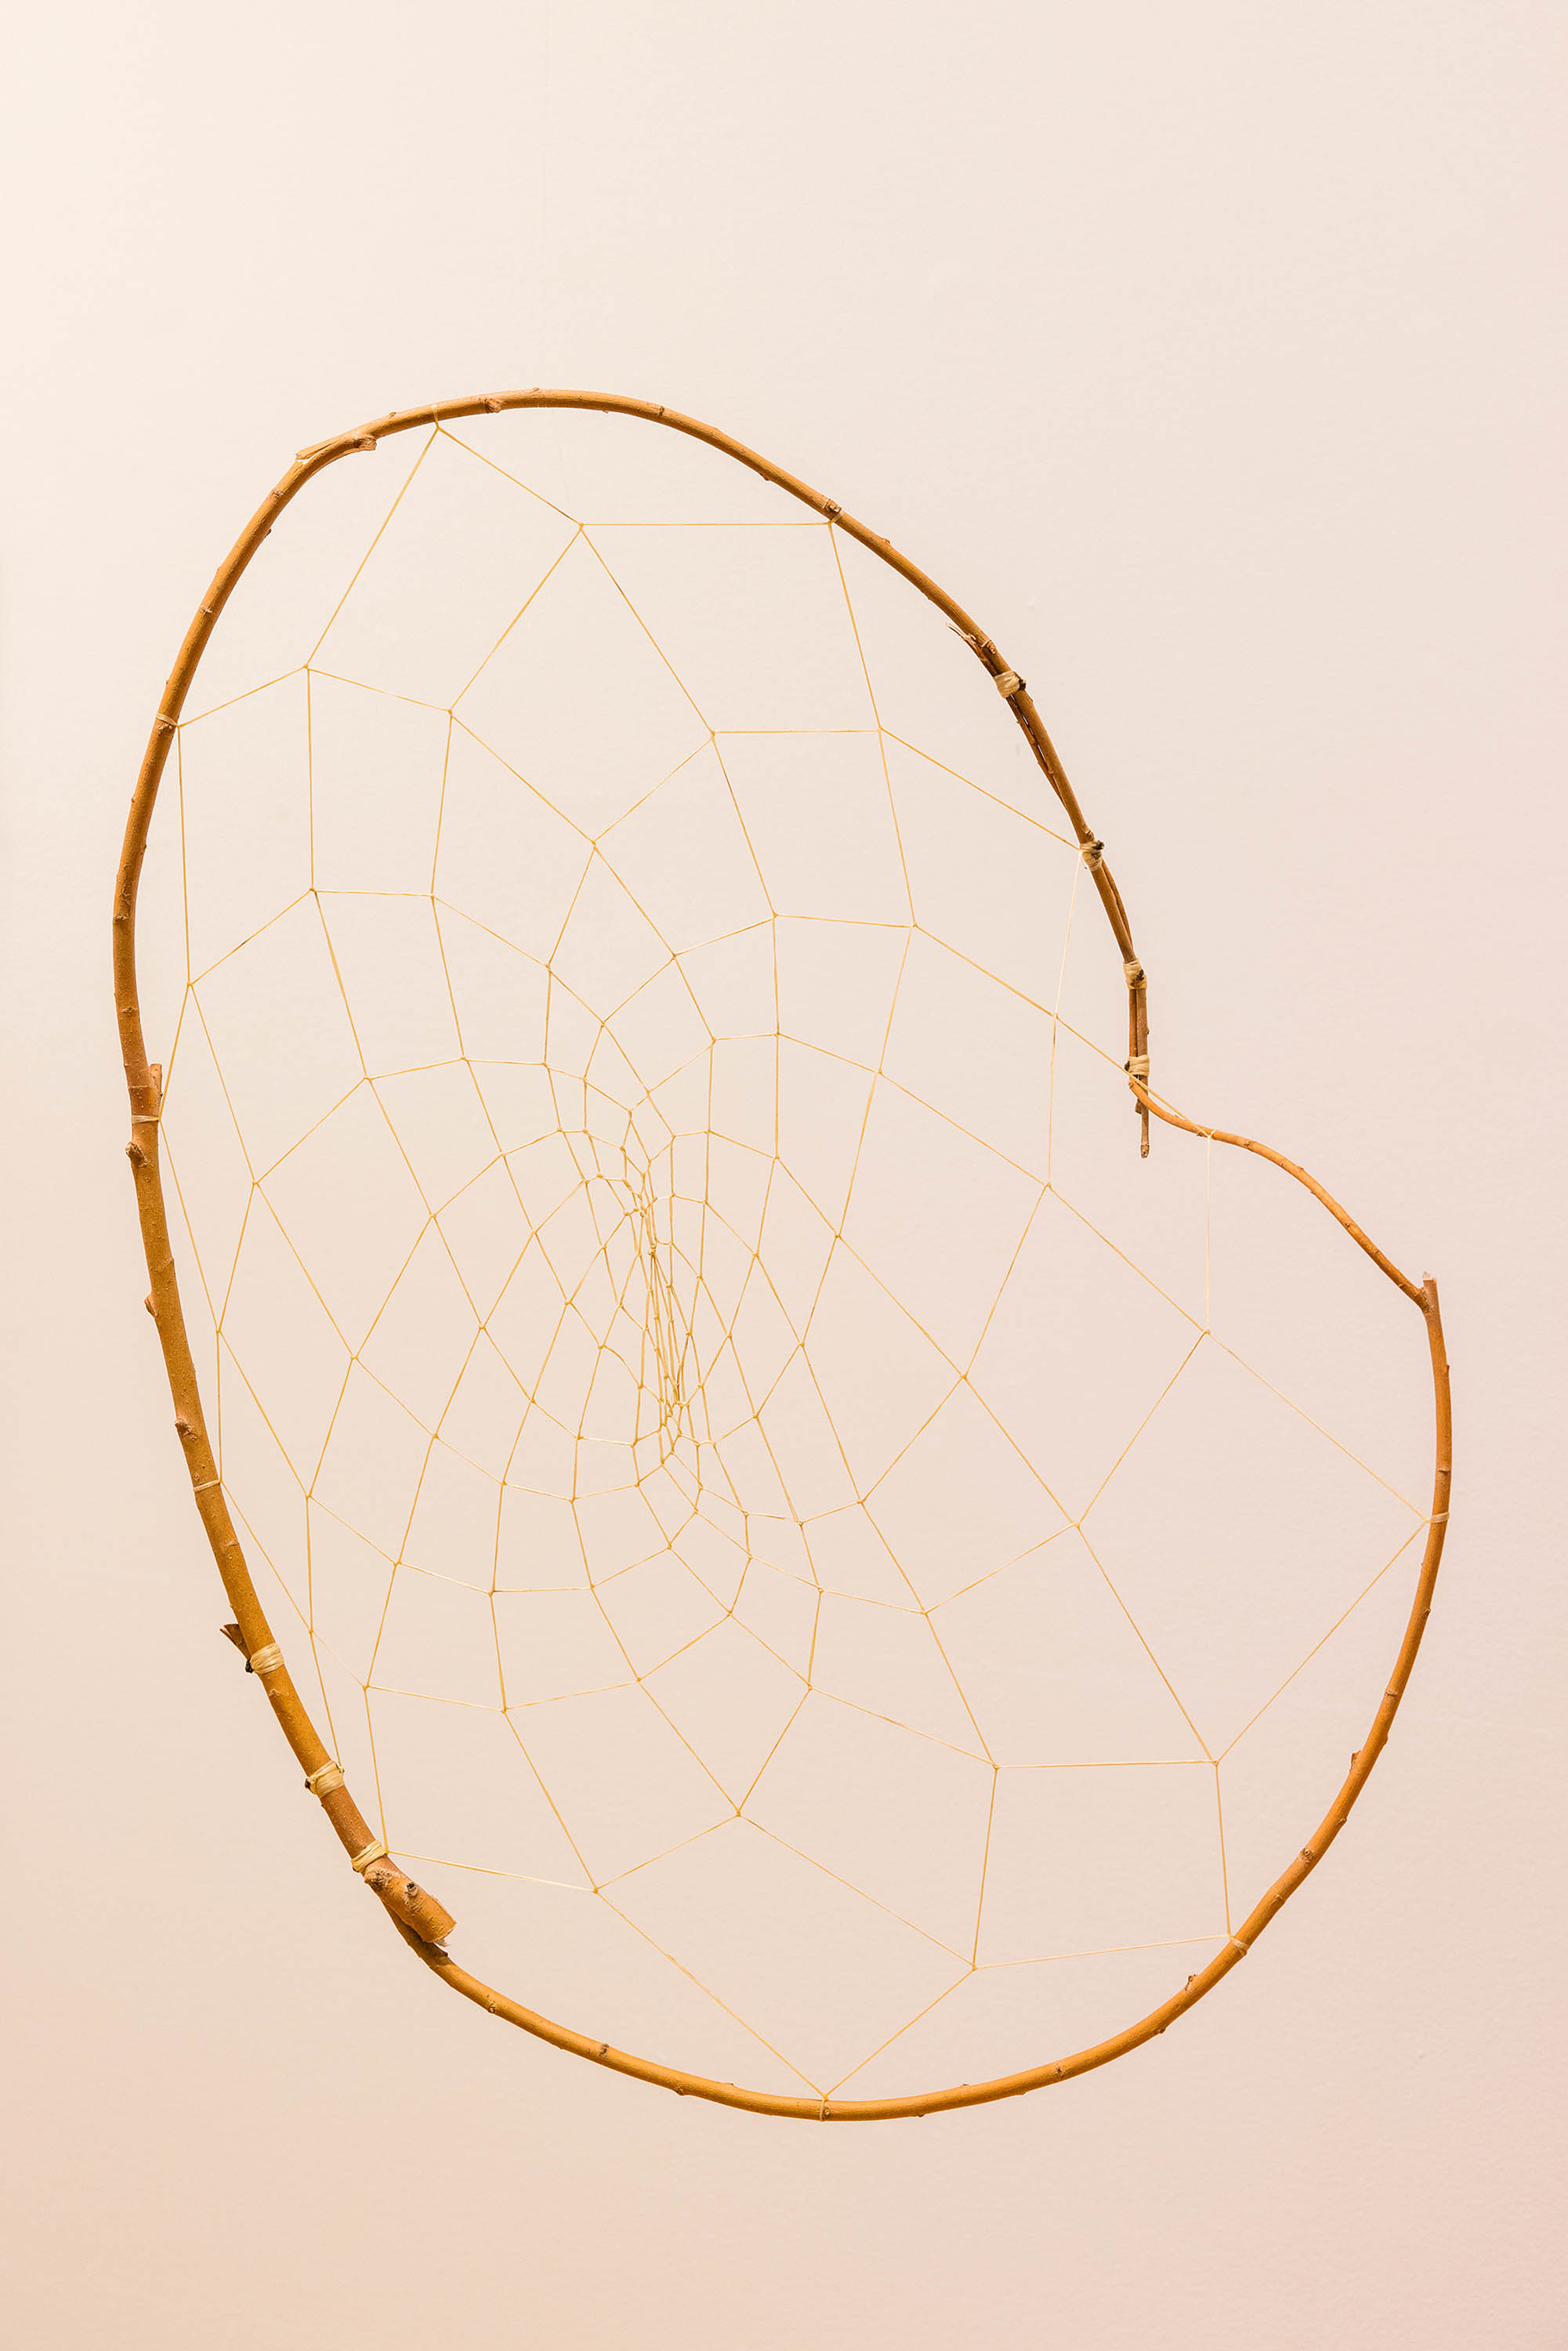 An irregularly-shaped dreamcatcher made from willow branches.